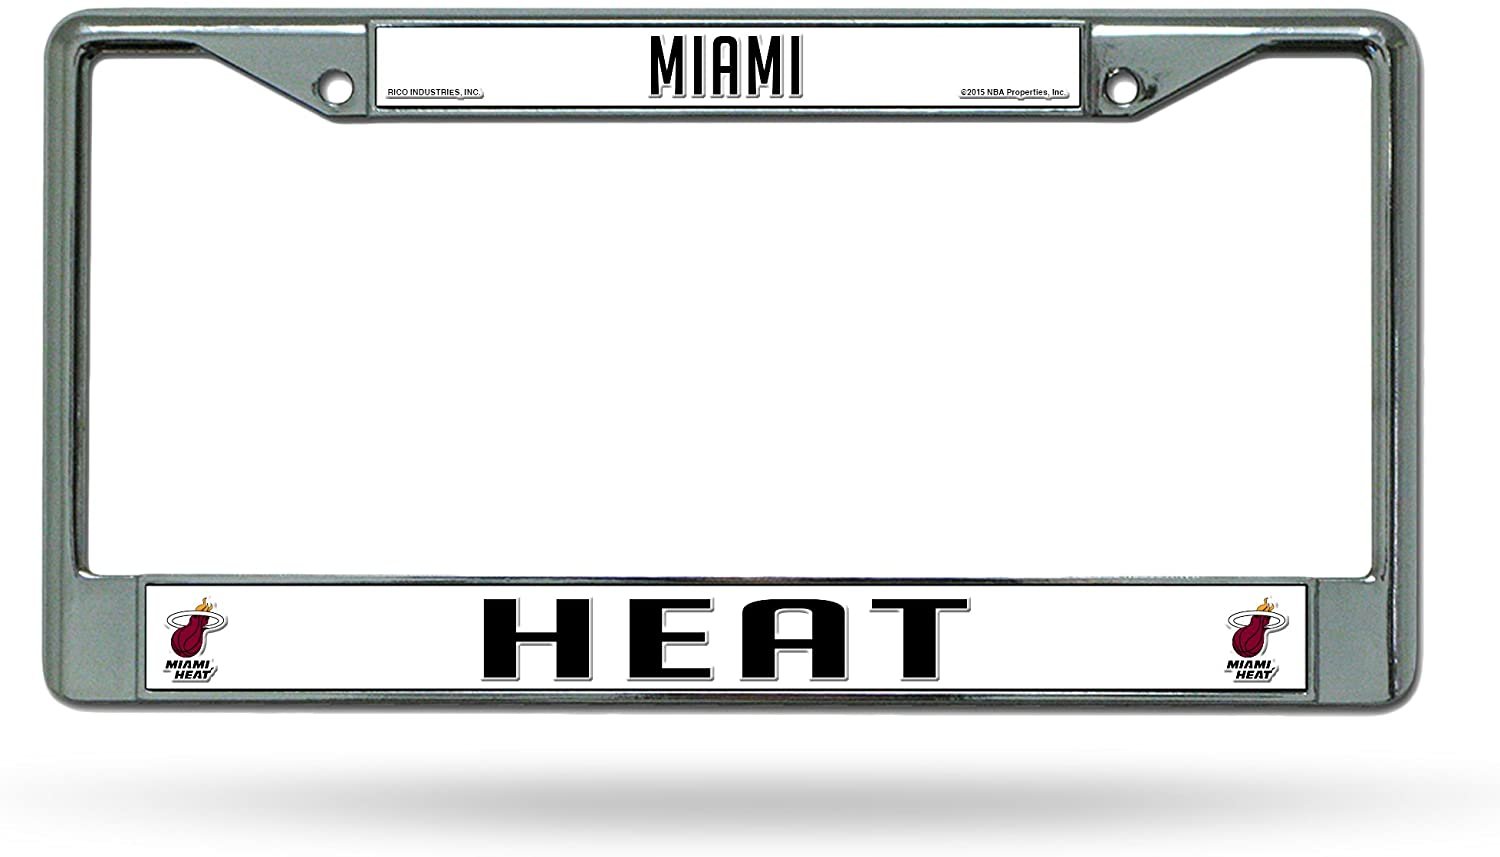 Miami Heat Metal License Plate Frame Chrome Tag Cover 6x12 Inch